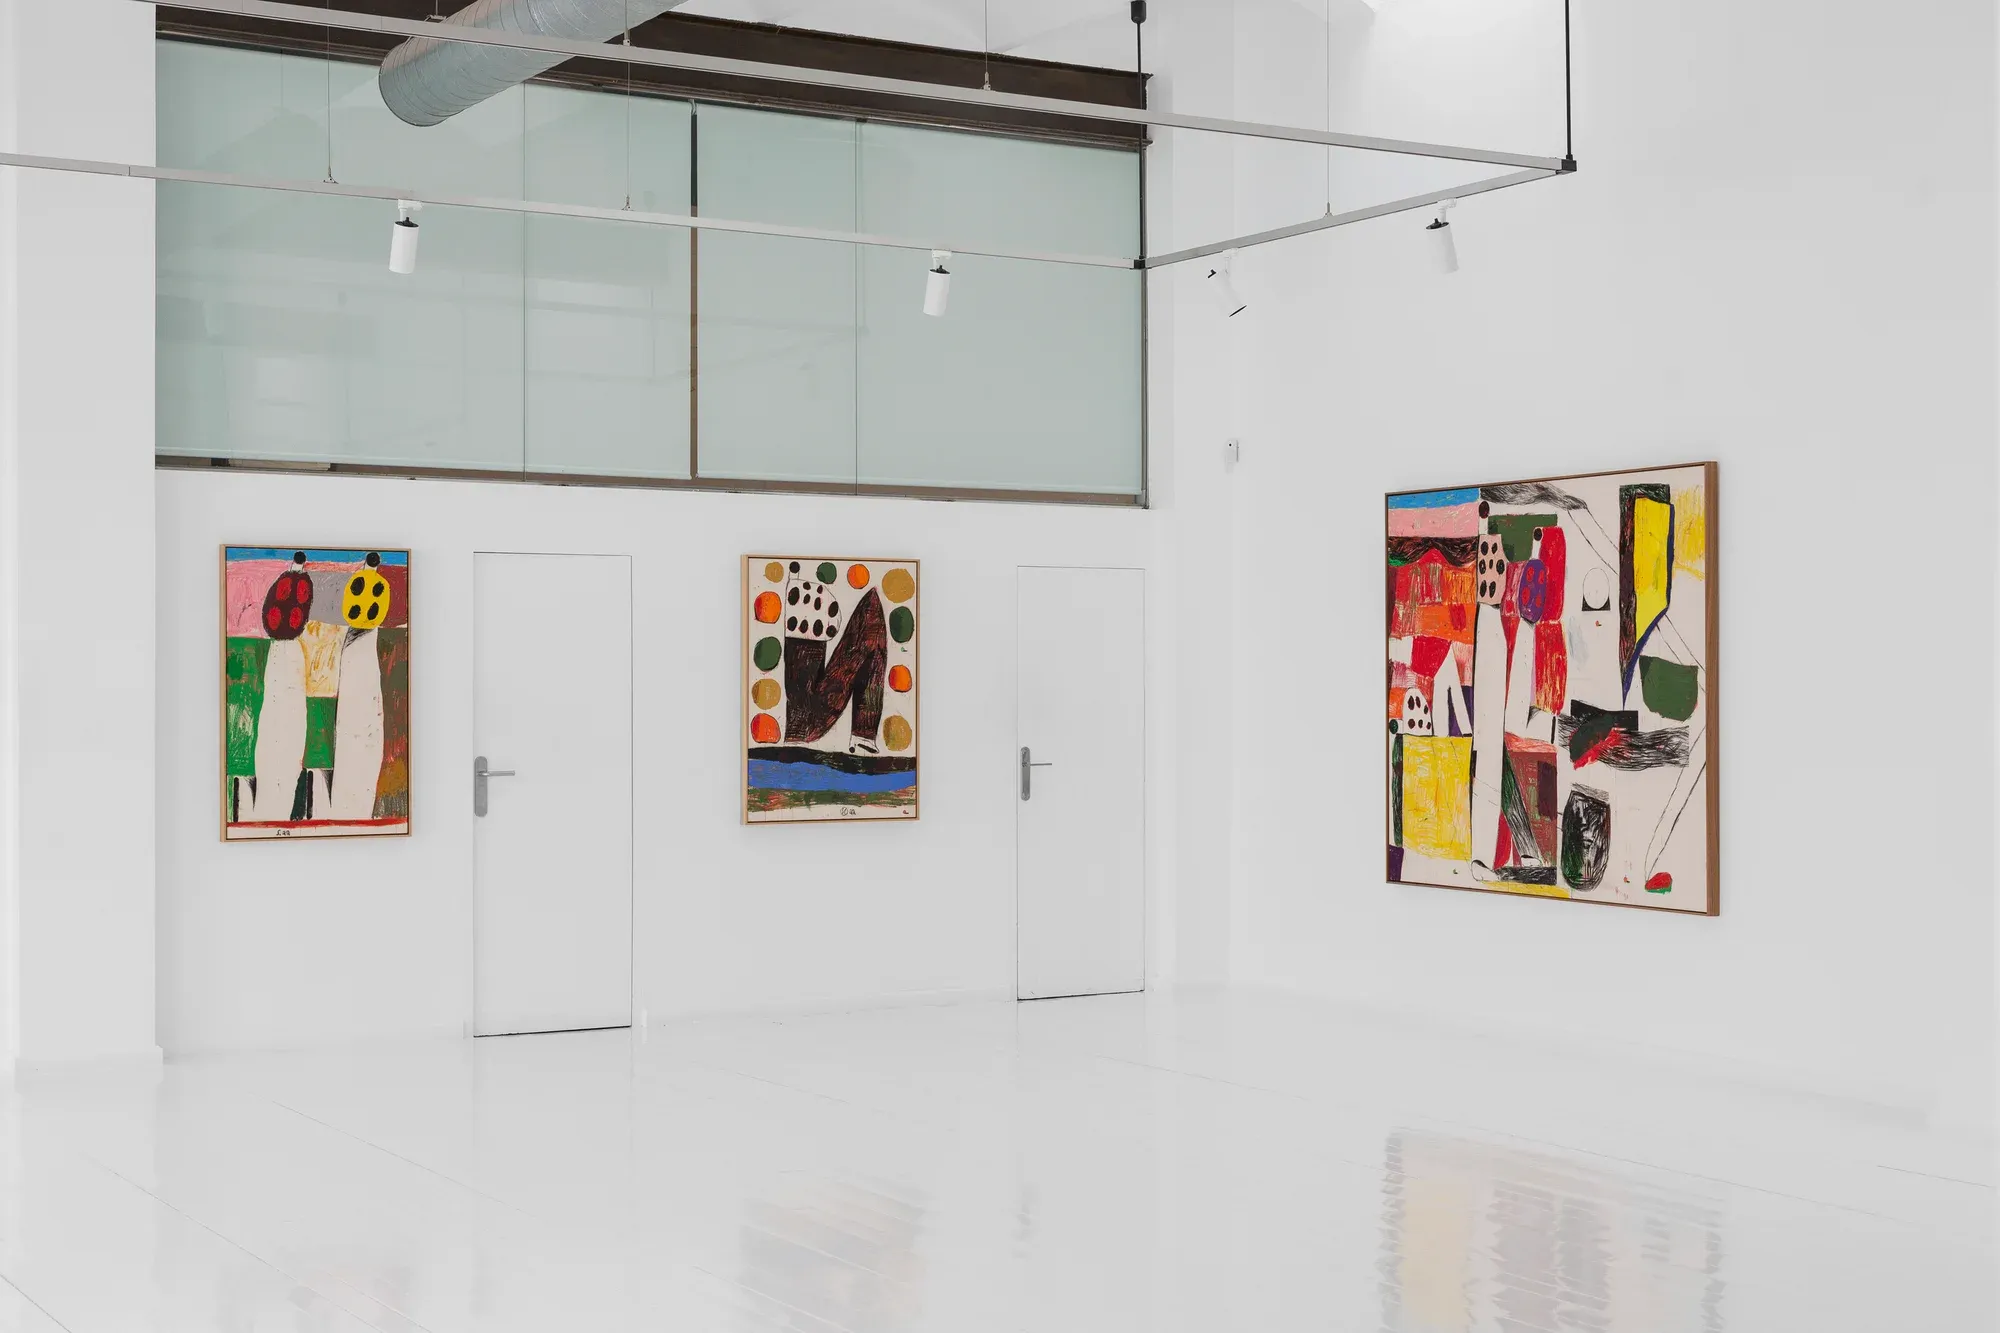 sune christiansen's "the leftovers" exhibition at alzueta gallery in barcelona, showcasing bold abstract paintings and contemporary art